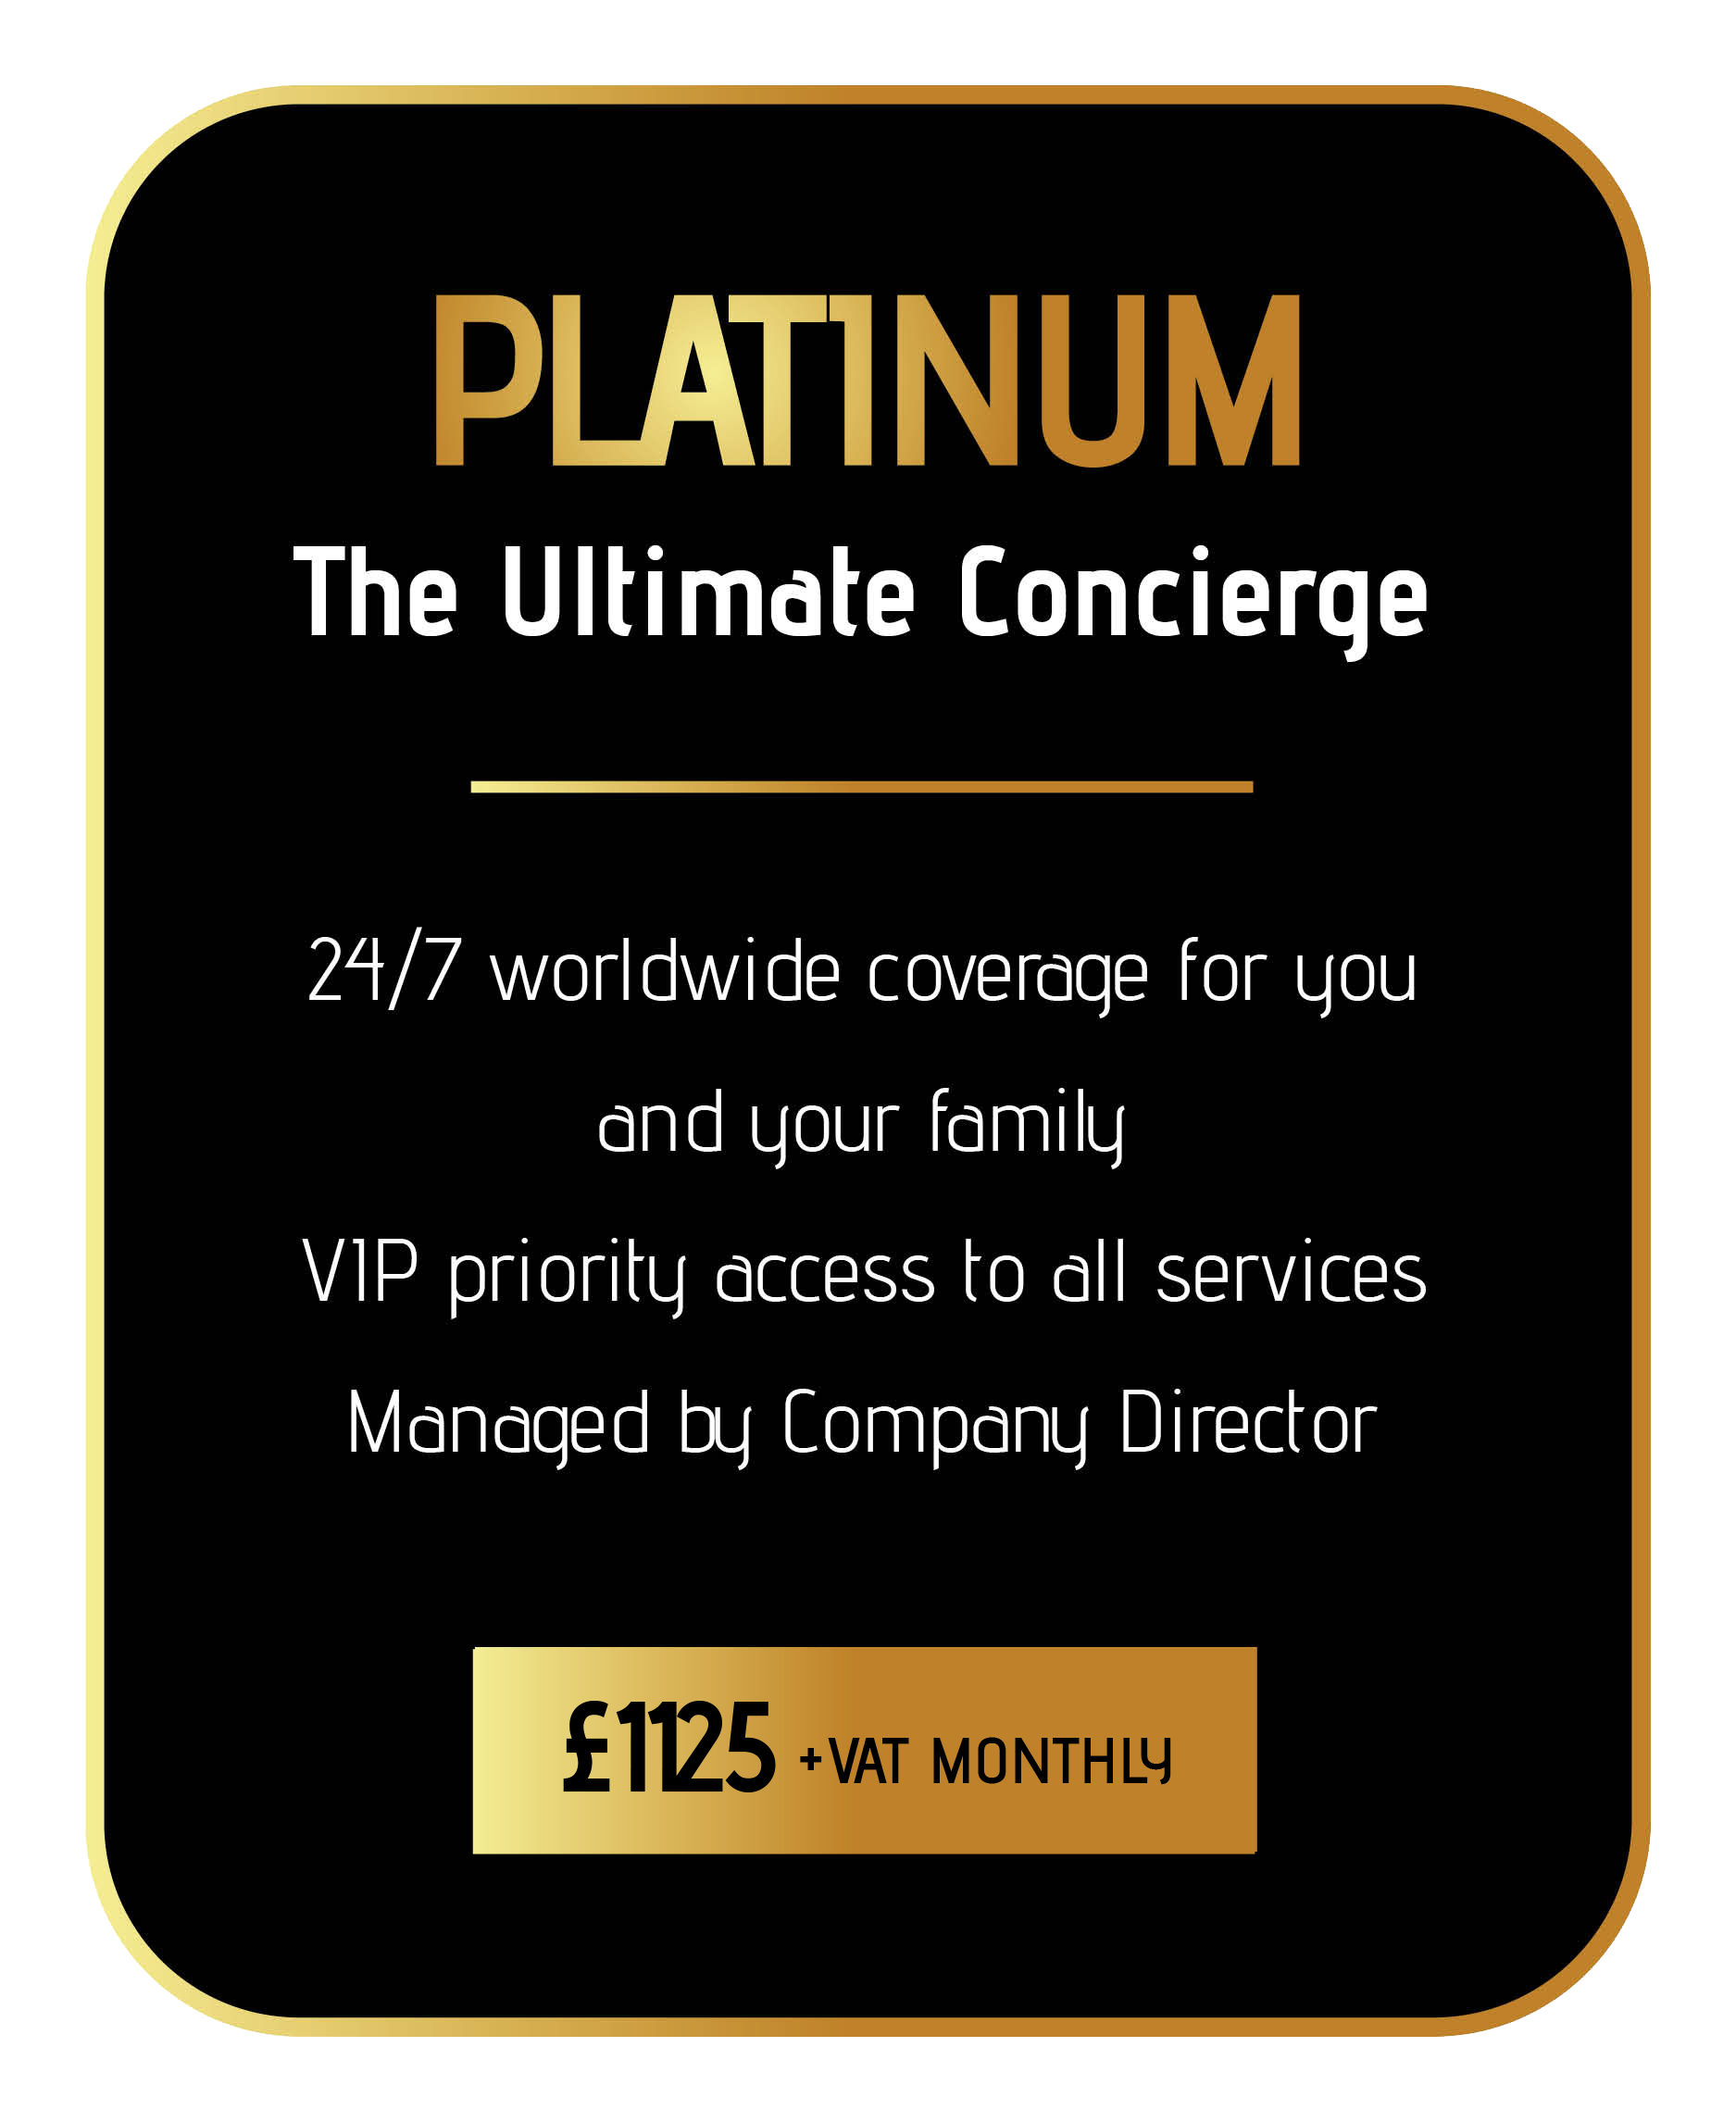 learn more about the sincura platinum concierge membership